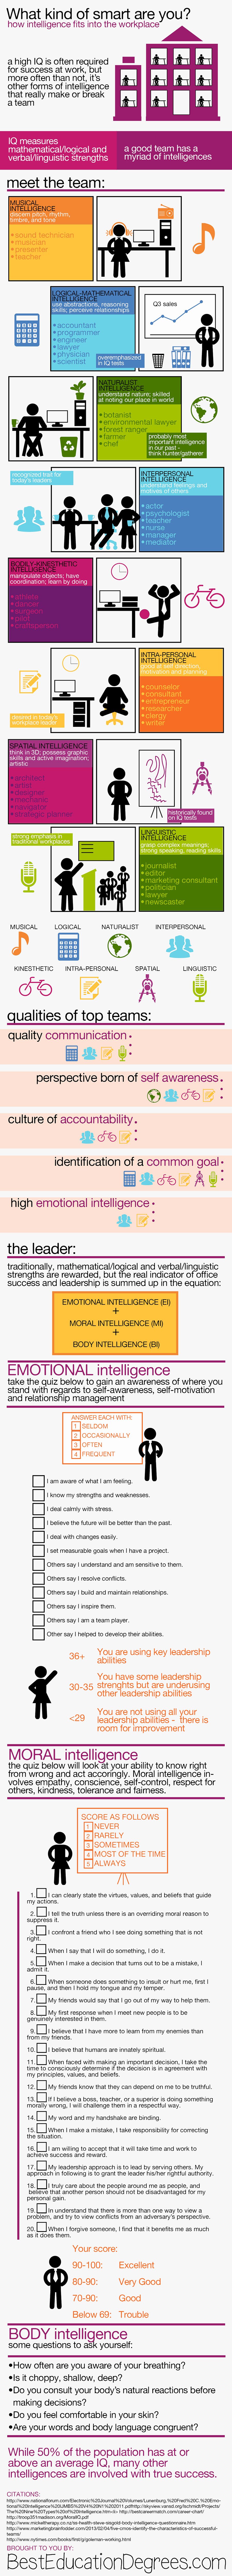 How Intelligence Fits Into The Workplace - infographic